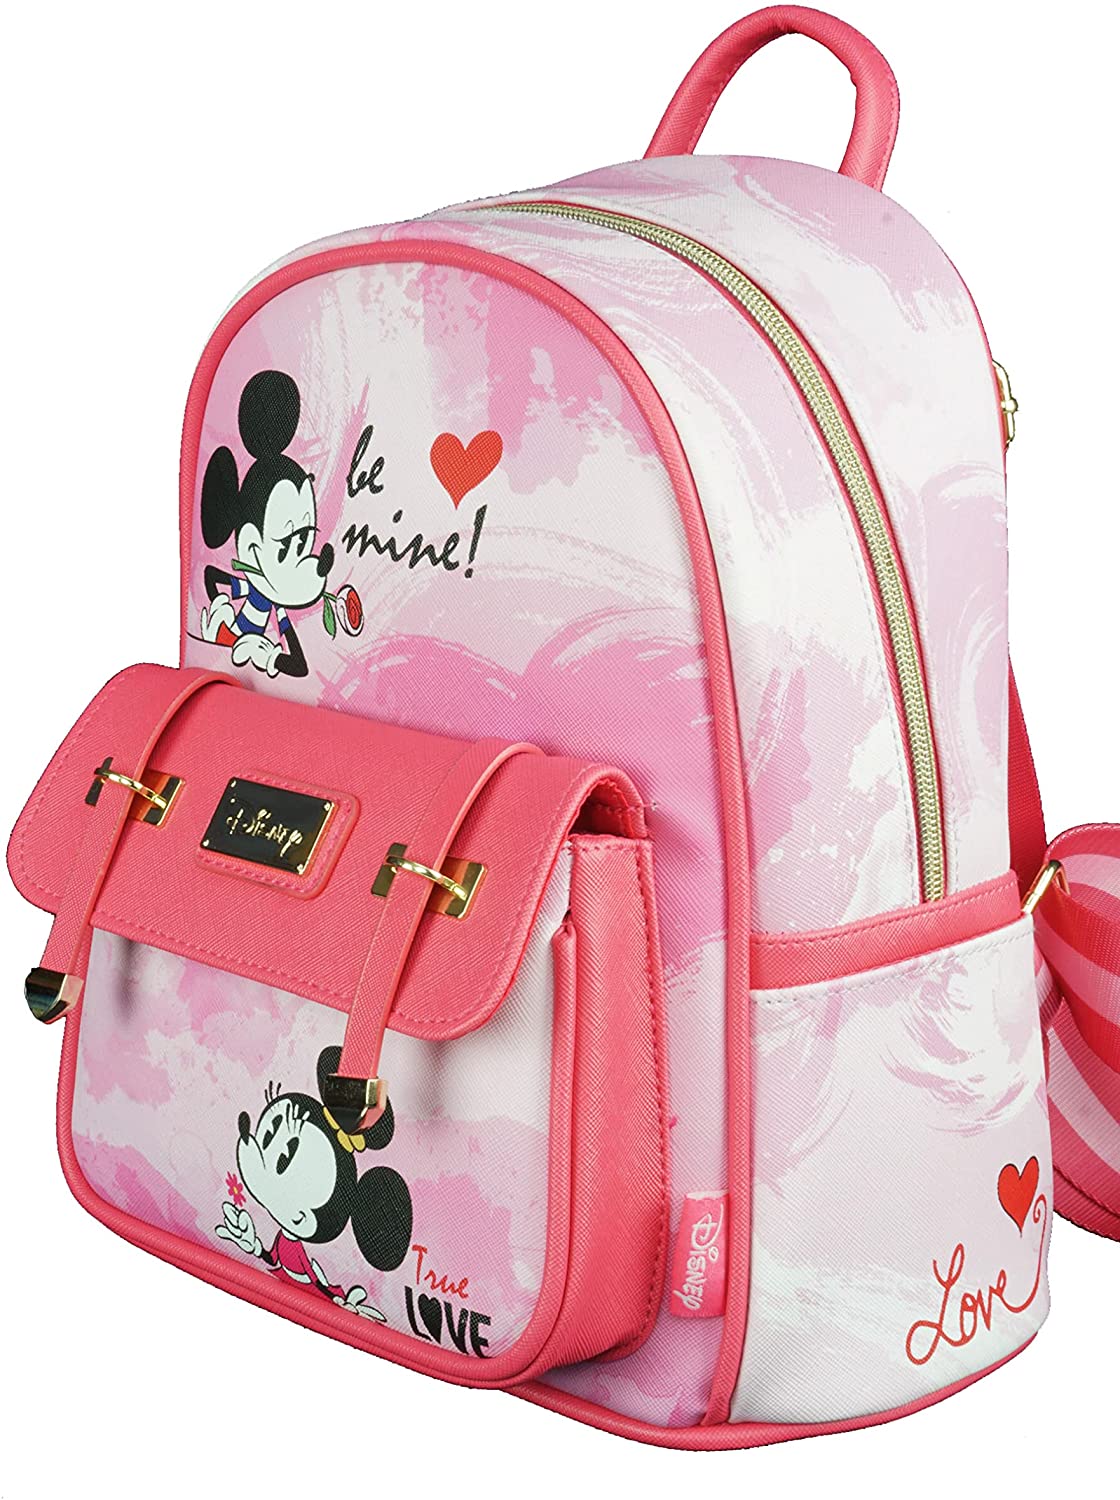 Mickey and Minnie Mouse 11" Vegan Leather Mini Backpack - A21804 - GTE Zone